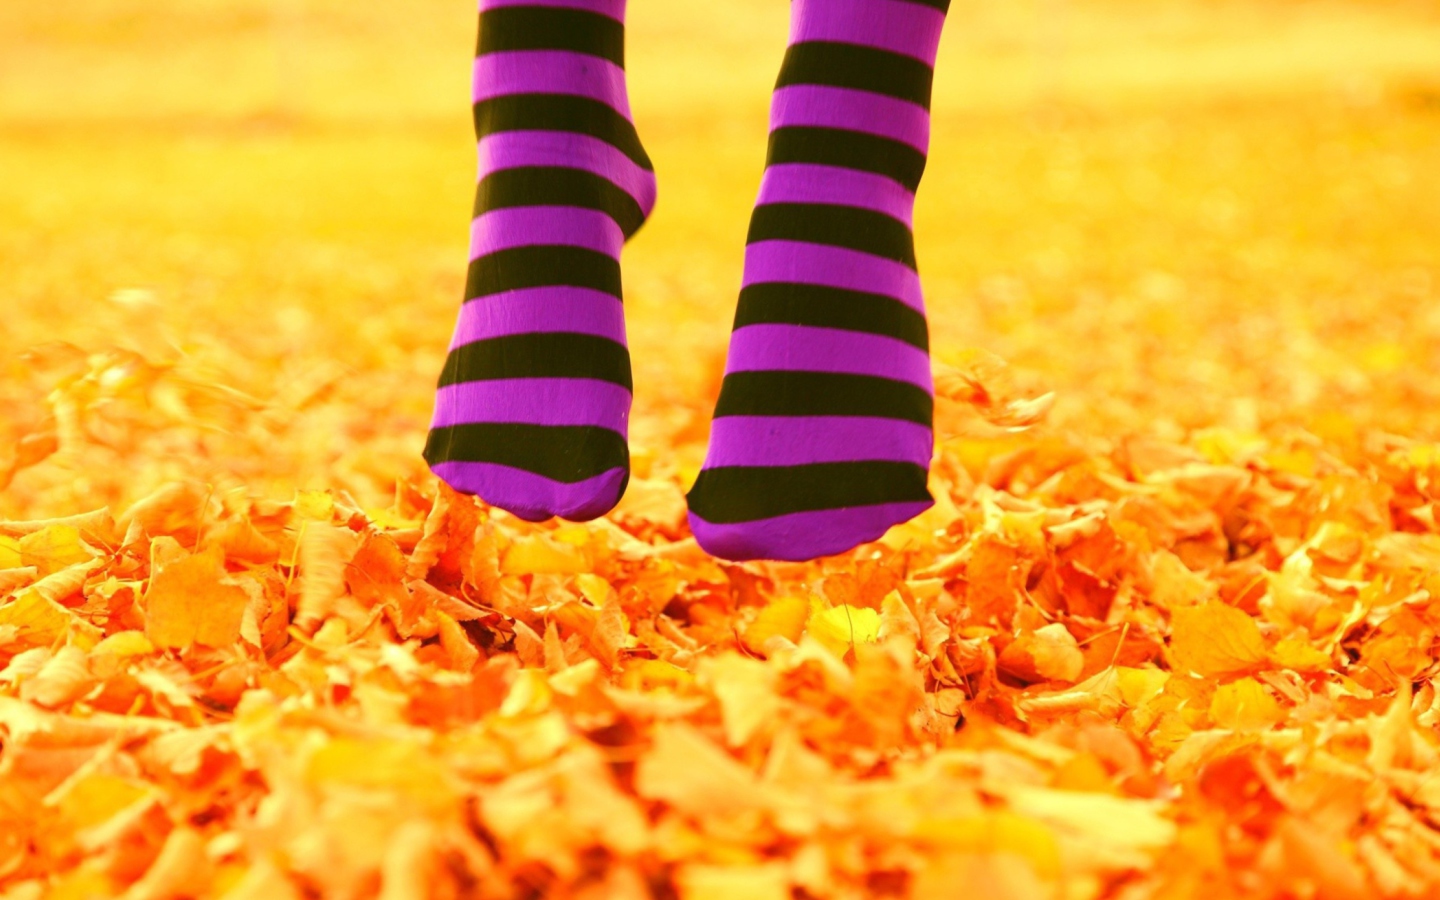 Purple Feet And Yellow Leaves wallpaper 1440x900